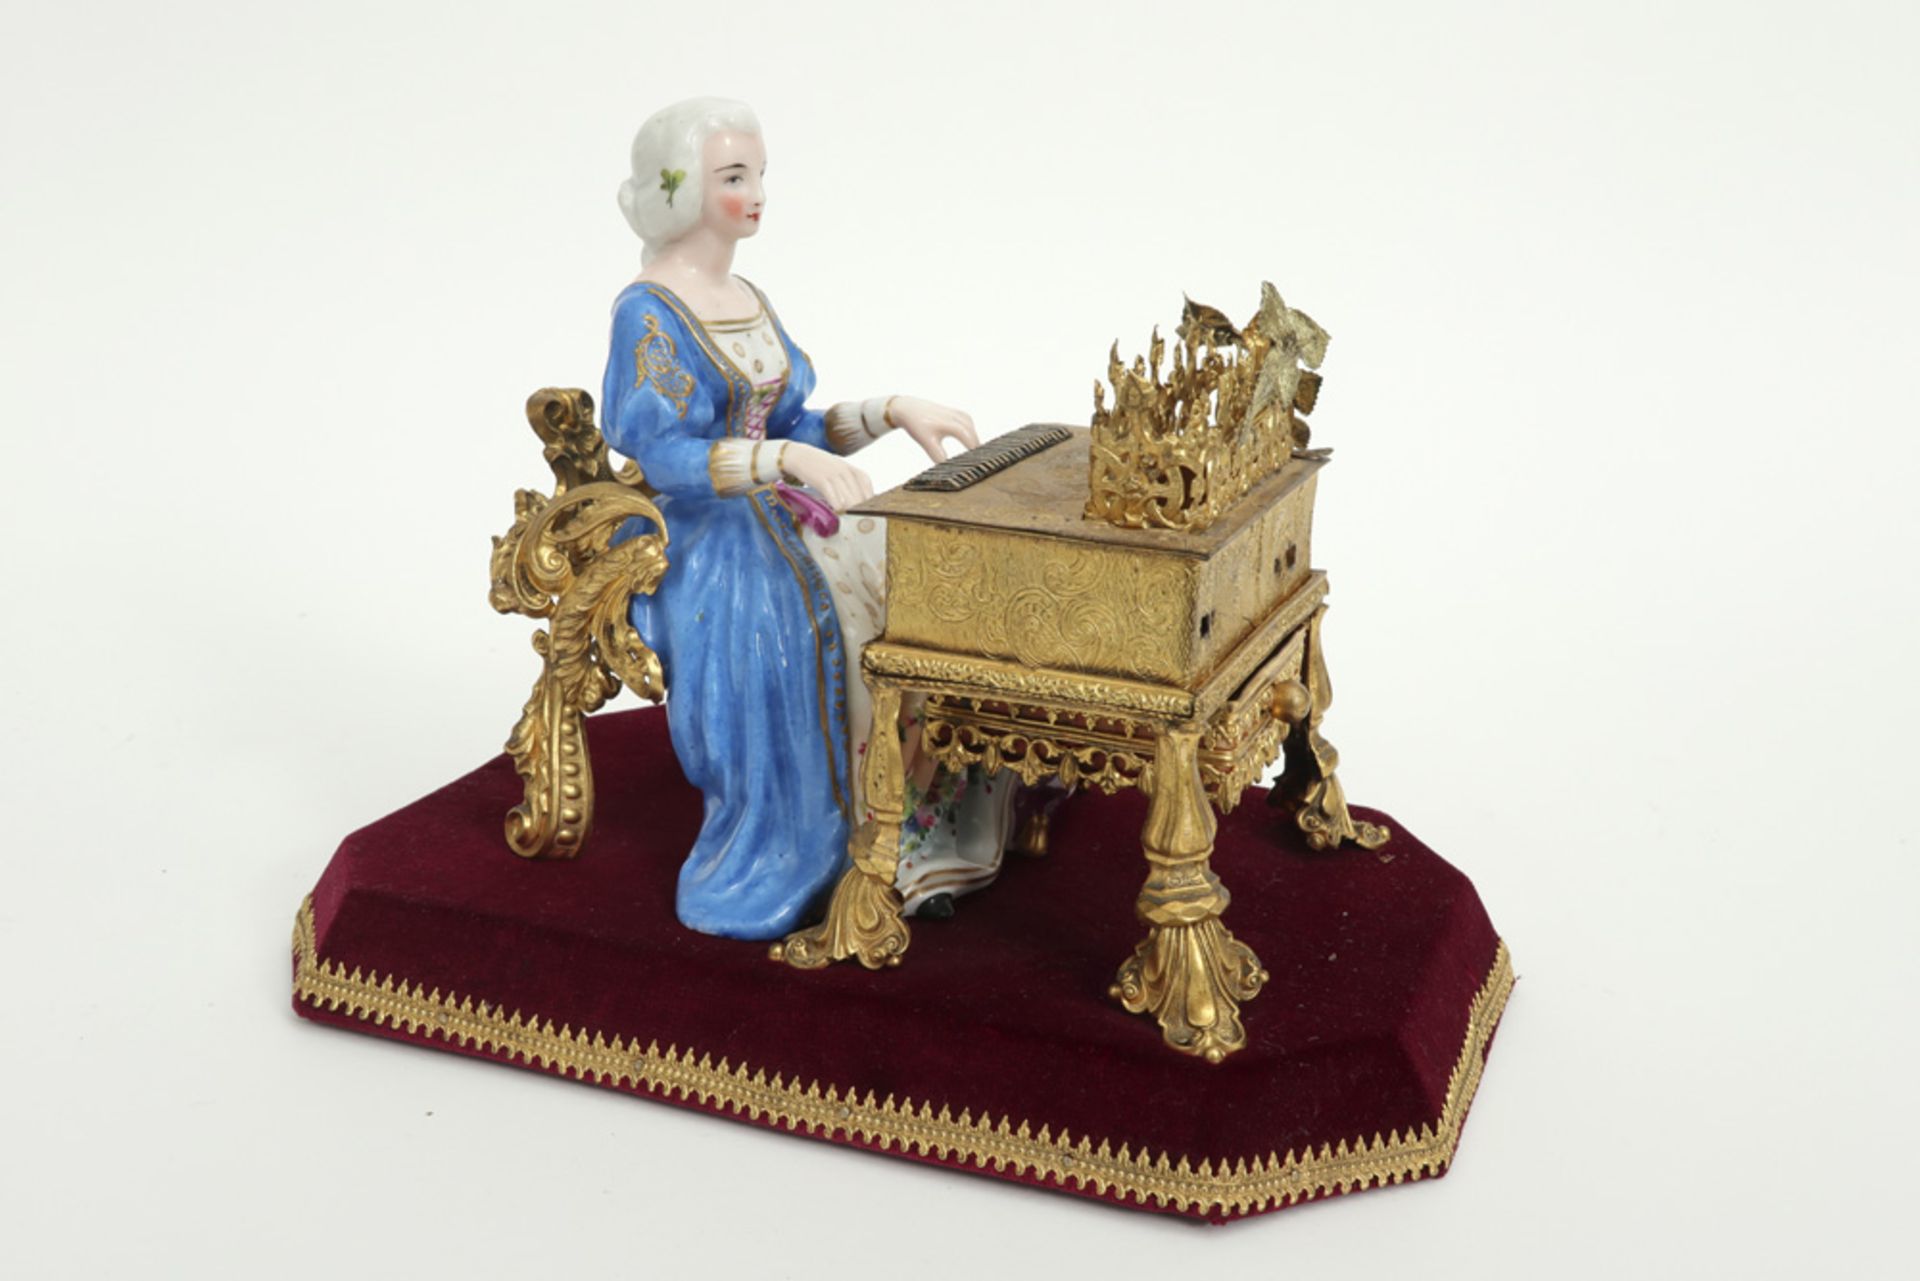 quite special figure in porcelain and gilded metal